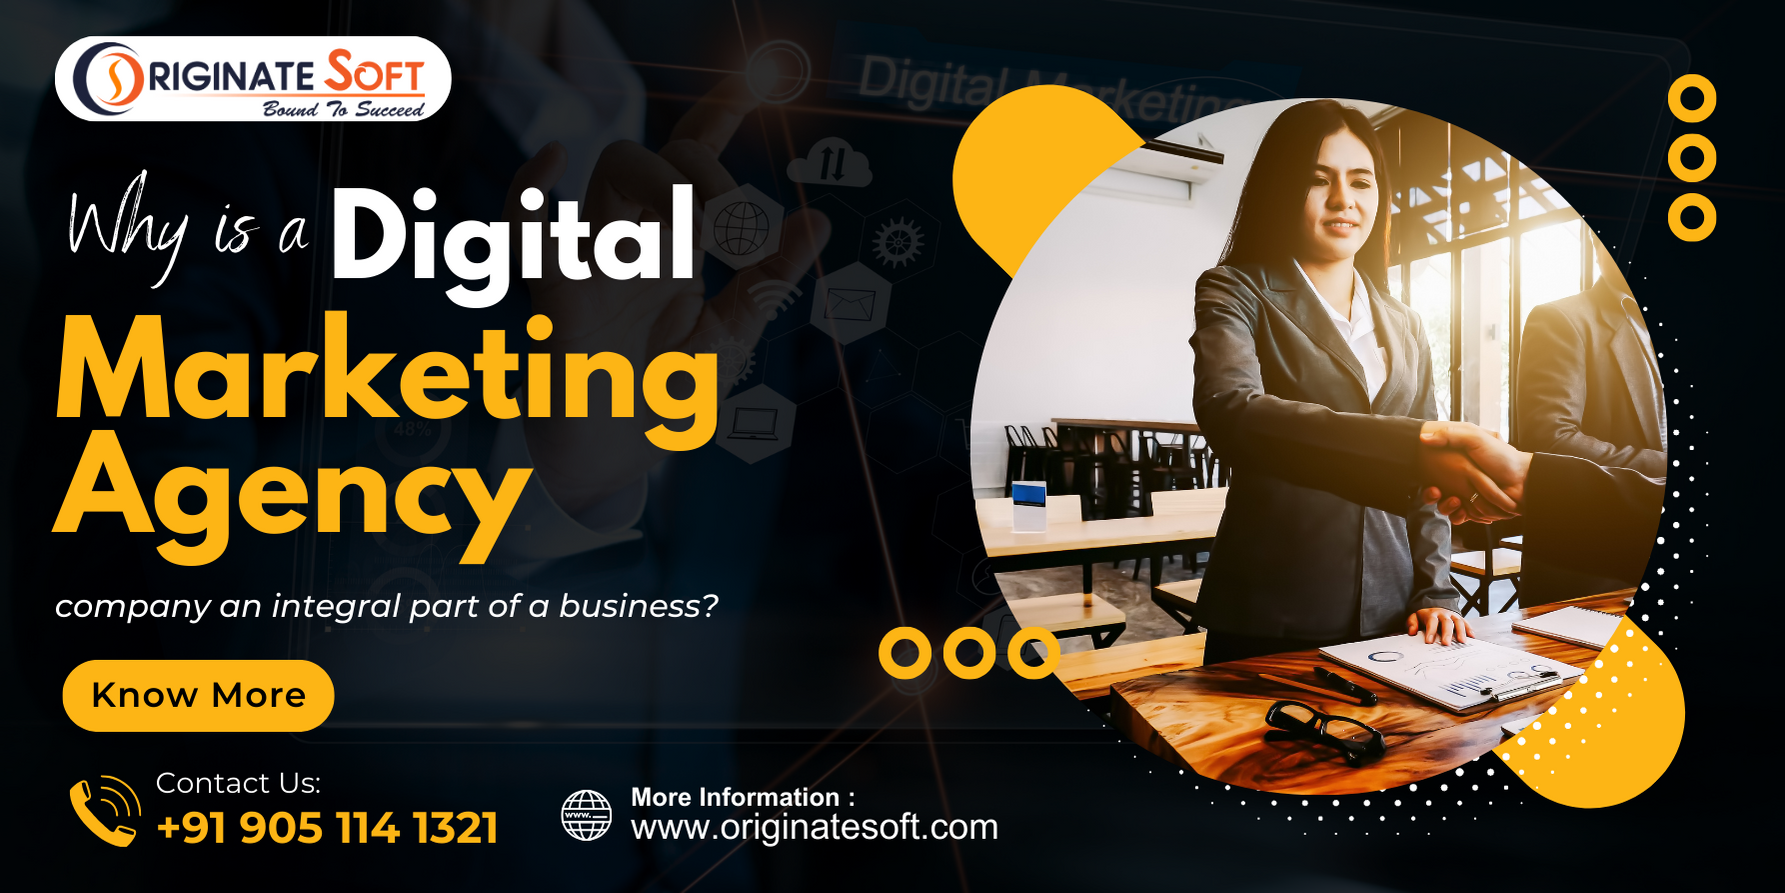 Why is a Digital Marketing Company an Integral Part of a Business?